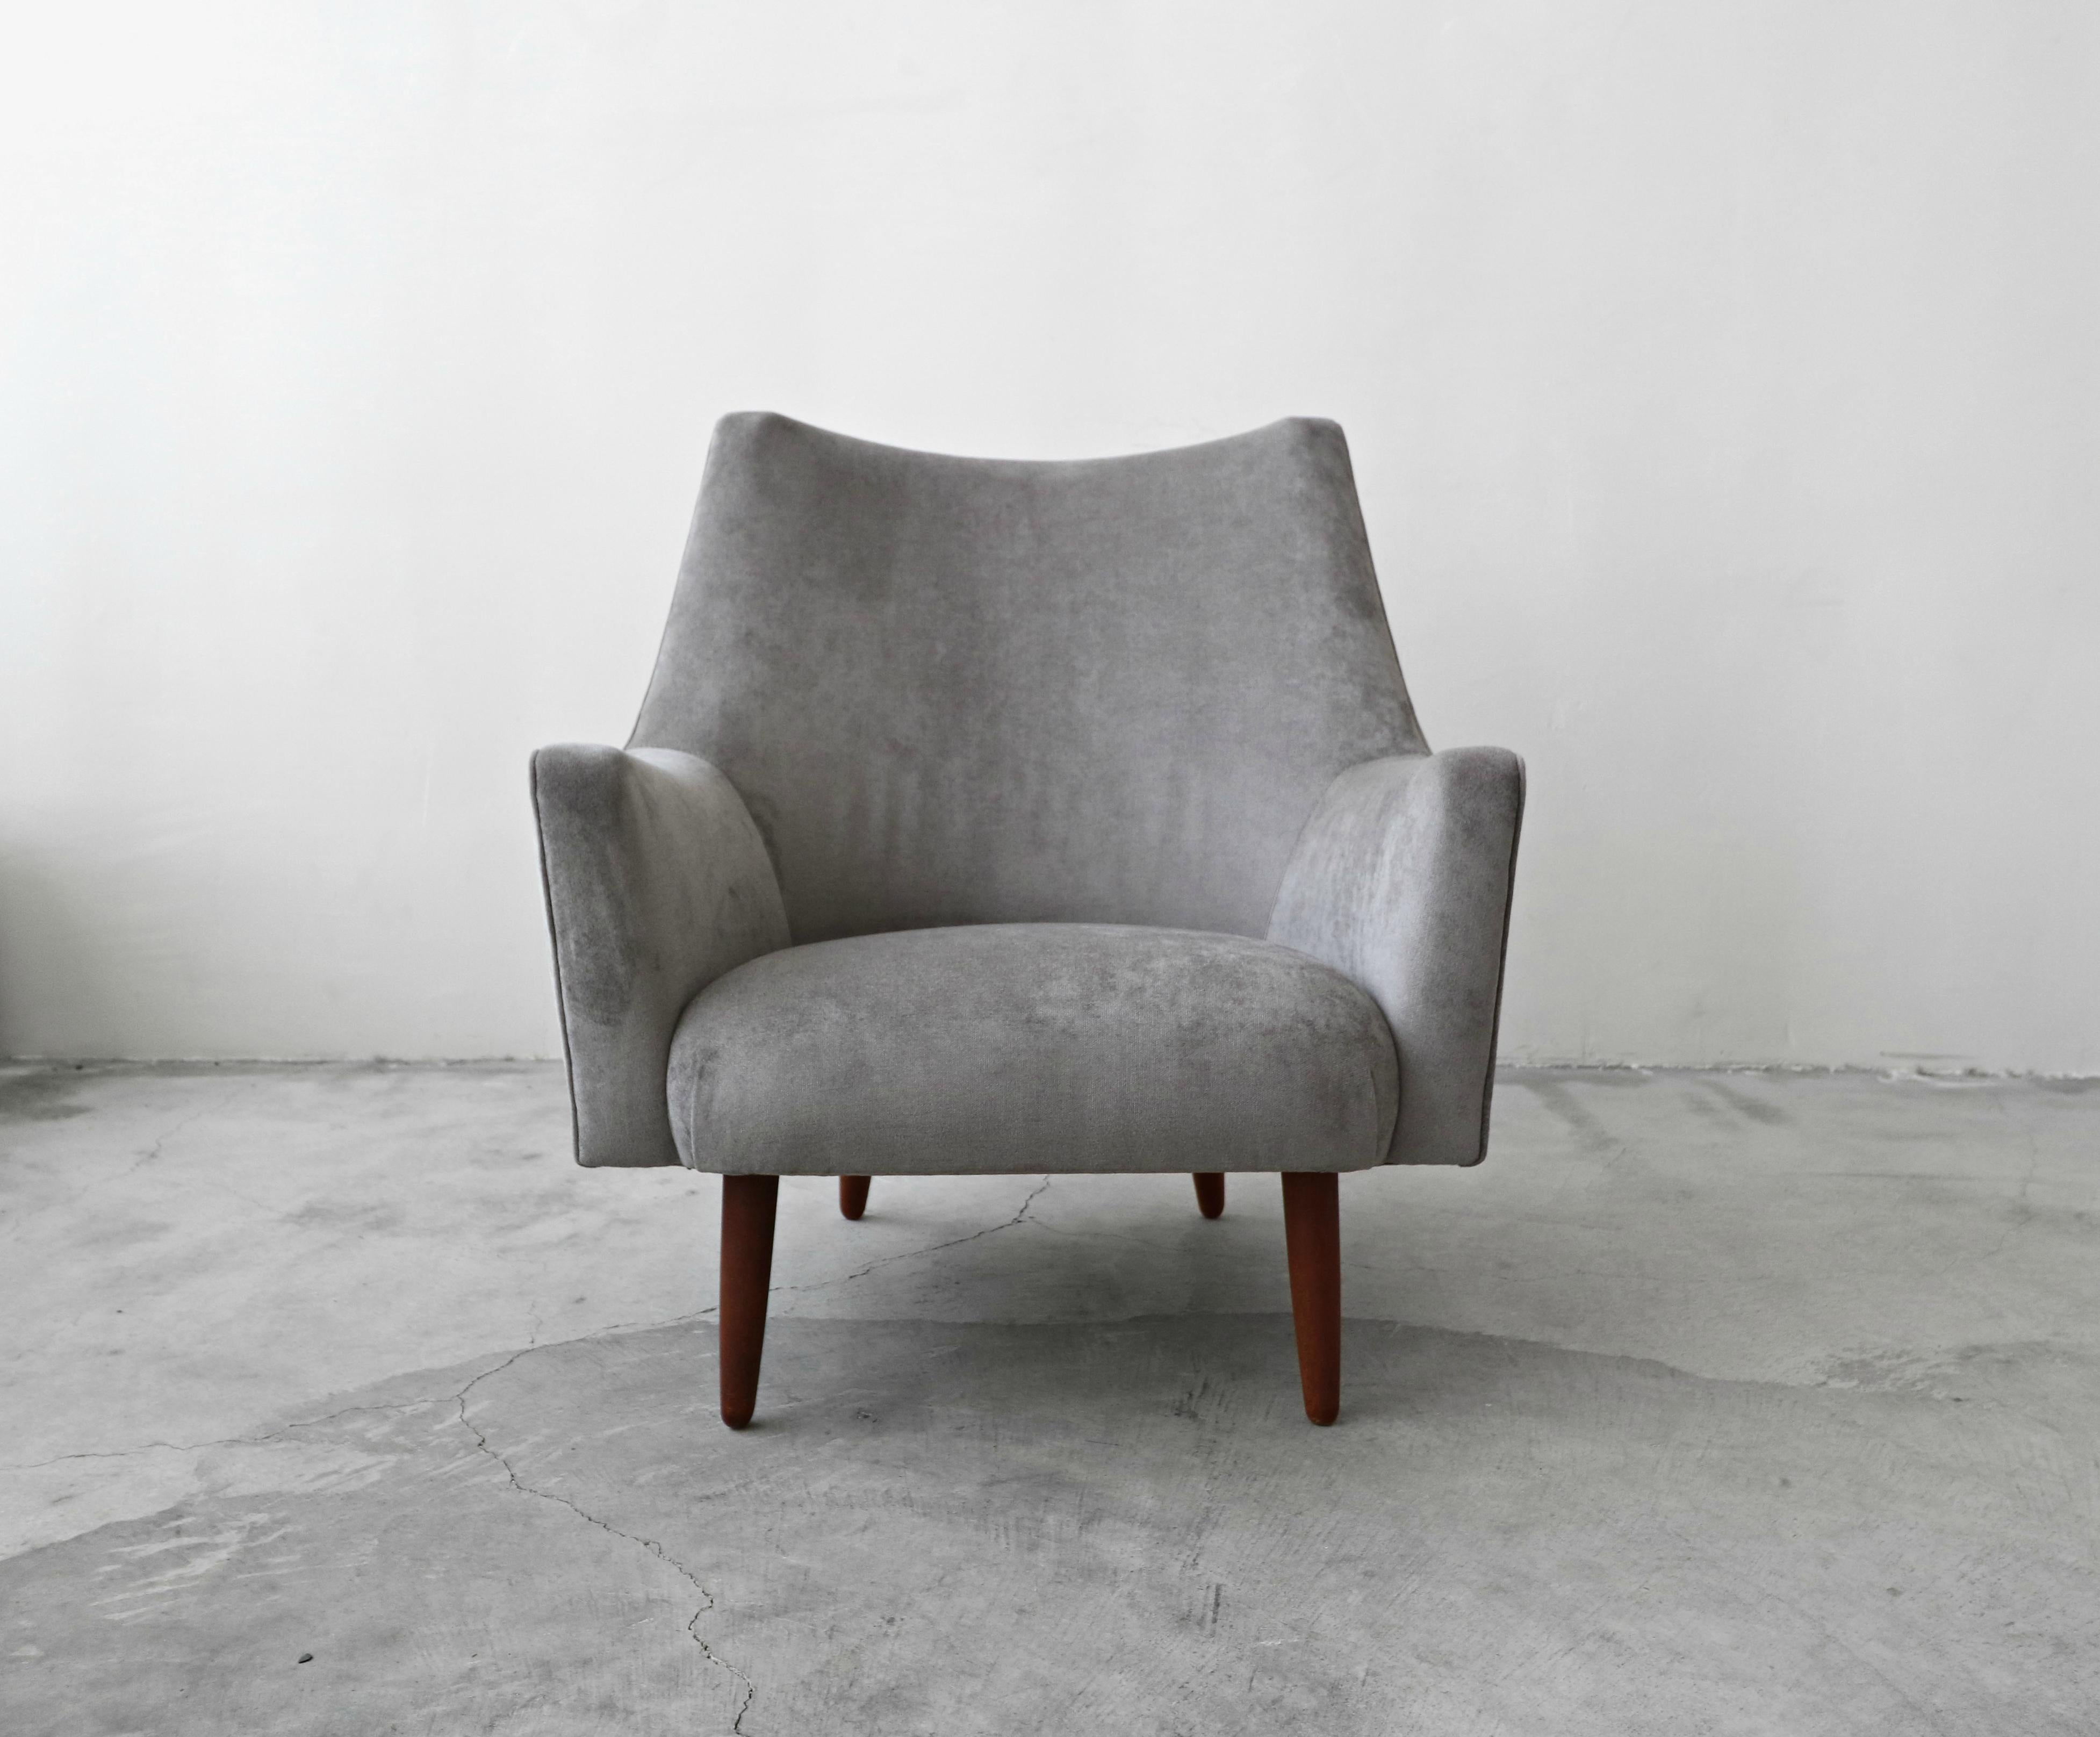 A beautiful midcentury Danish lounge chair. Large enough and stylish enough to stand alone, this gorgeous chair is the perfect one off chair for any room. Designed with Classic Danish craftsmanship, there's not a line that disappoints. A truly